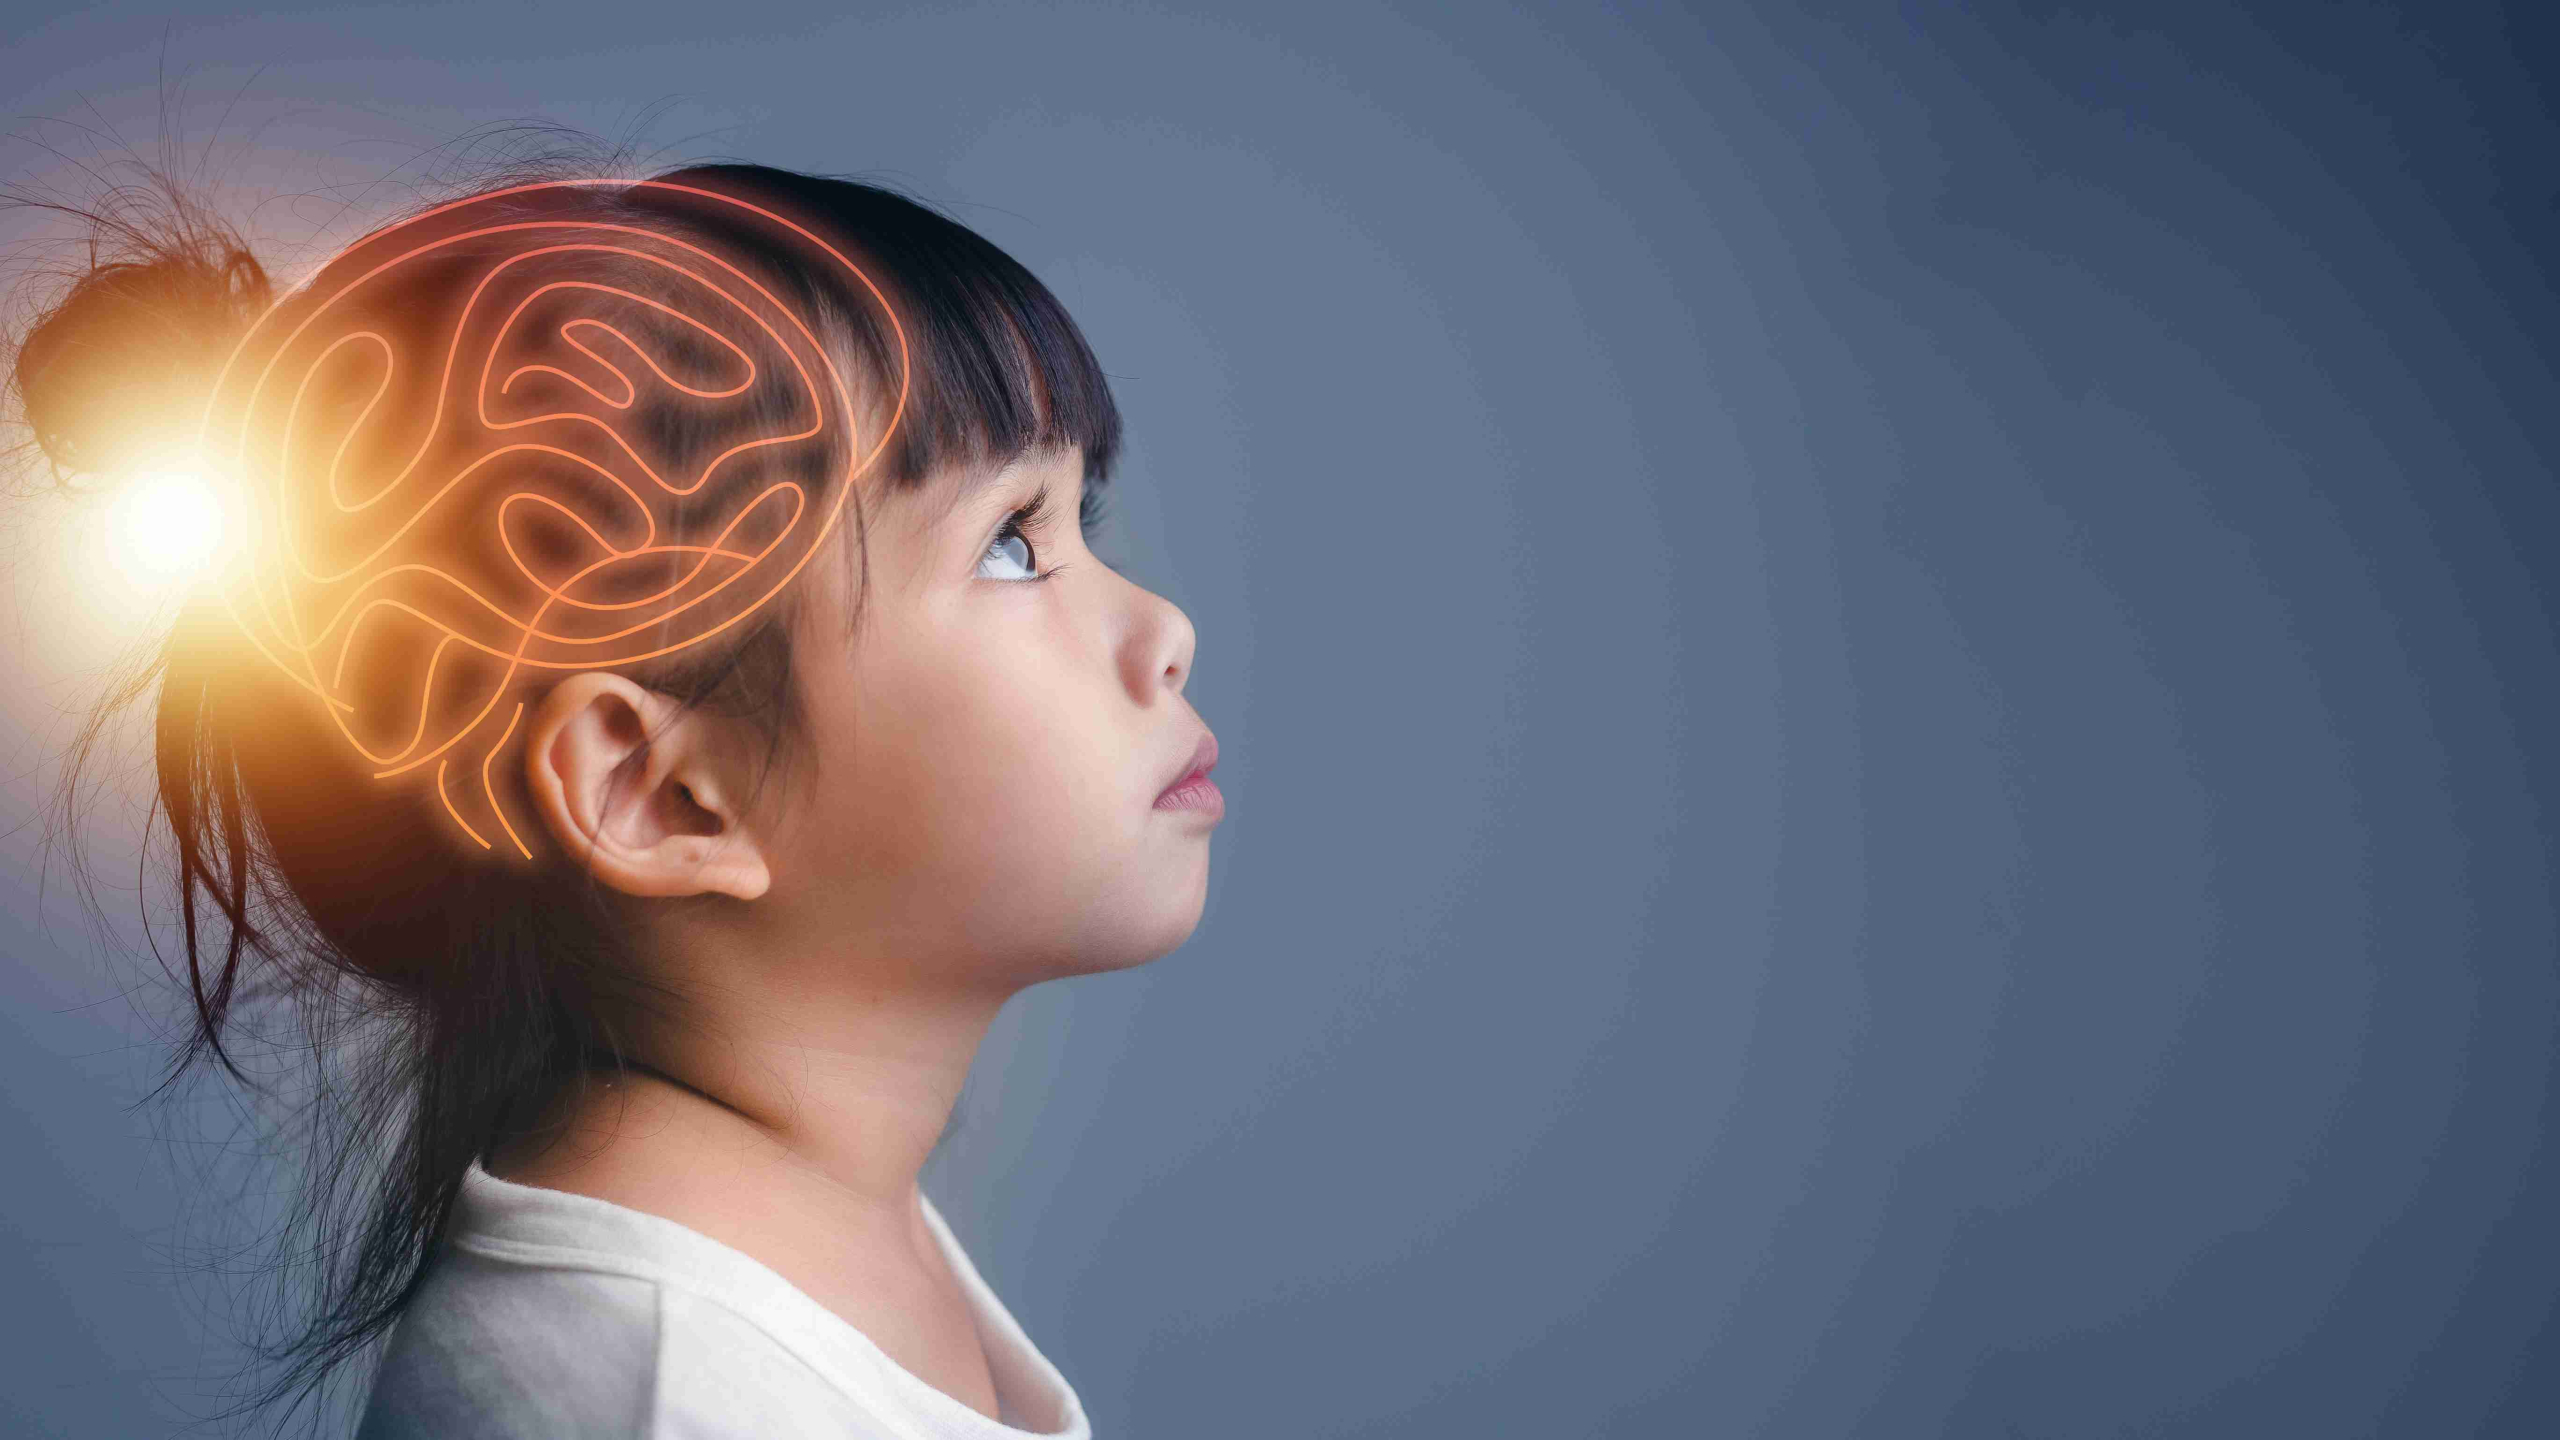 A side profile of a child. A glowing illustration of a brain is overlaid on the child's head.